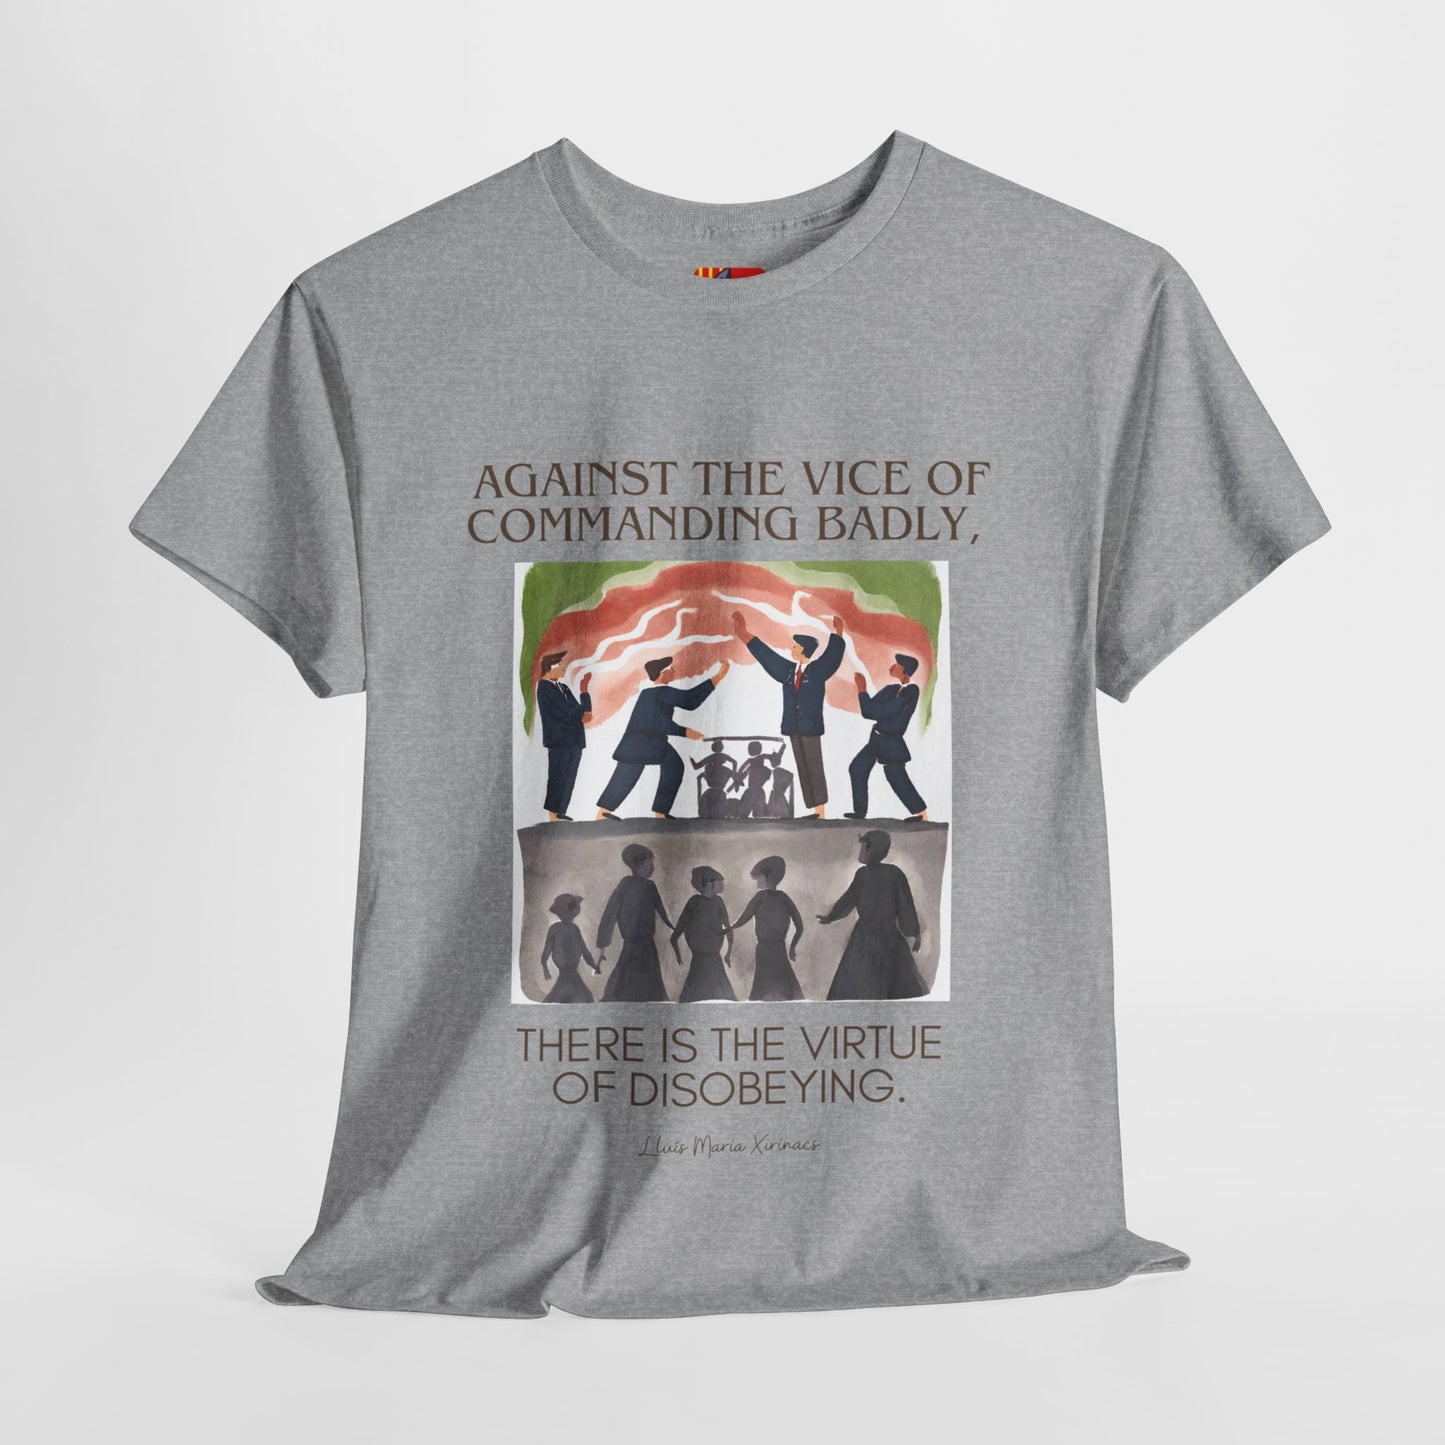 The Independent Thinker T-Shirt: Question Authority"Disobeying... badly" Lluis Maria Xirinacs